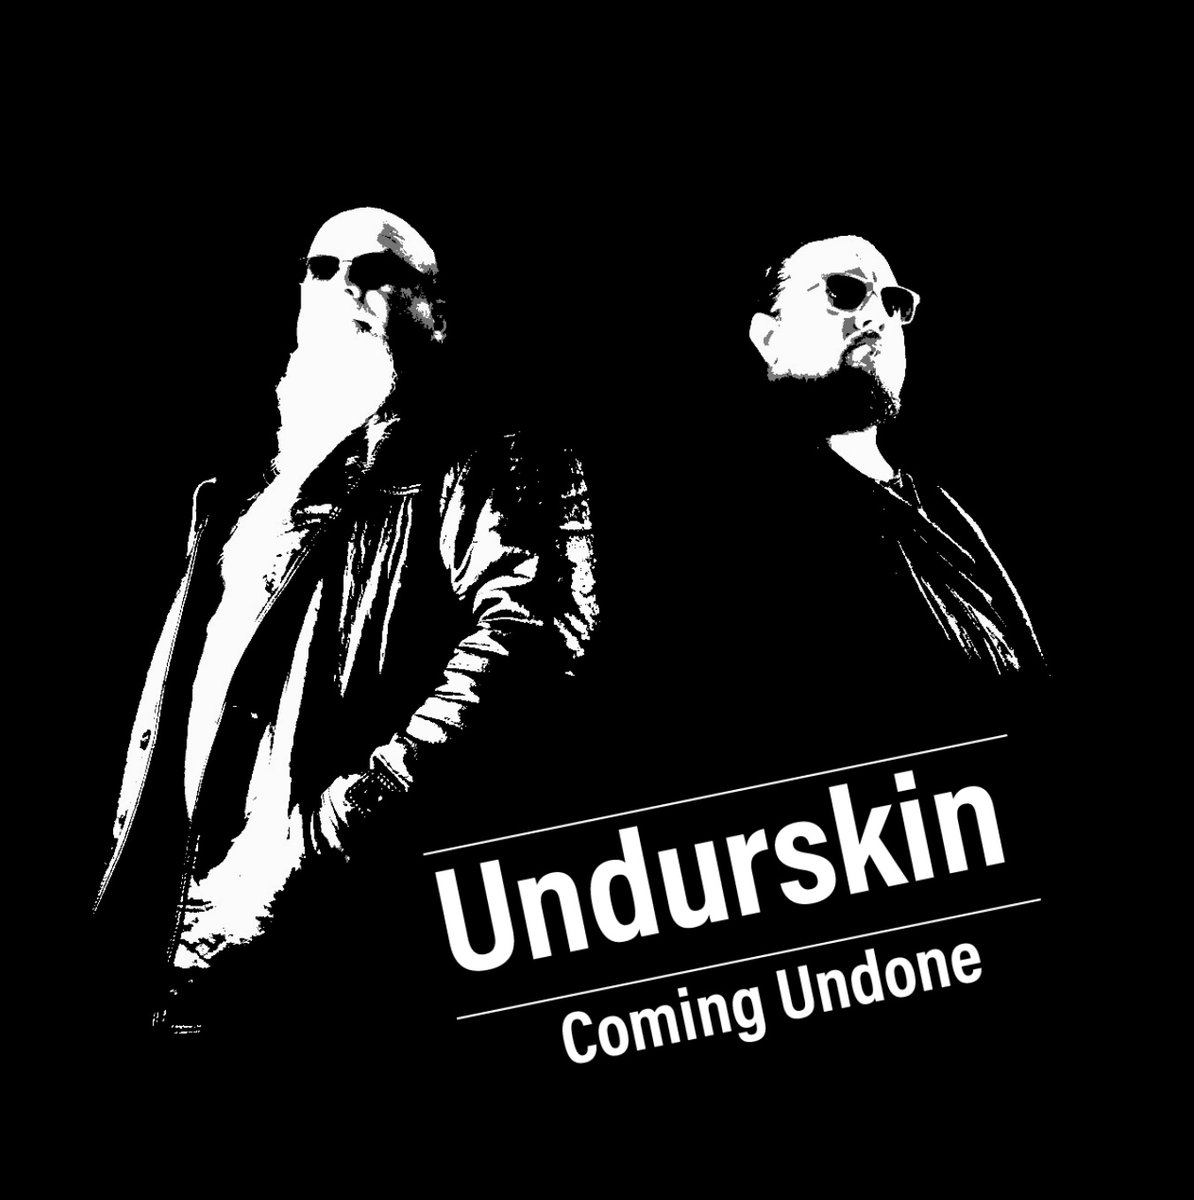 We deliver the tasty vibes here on MM Radio with Coming Undone thanks to @undurskin Listen here on mm-radio.com